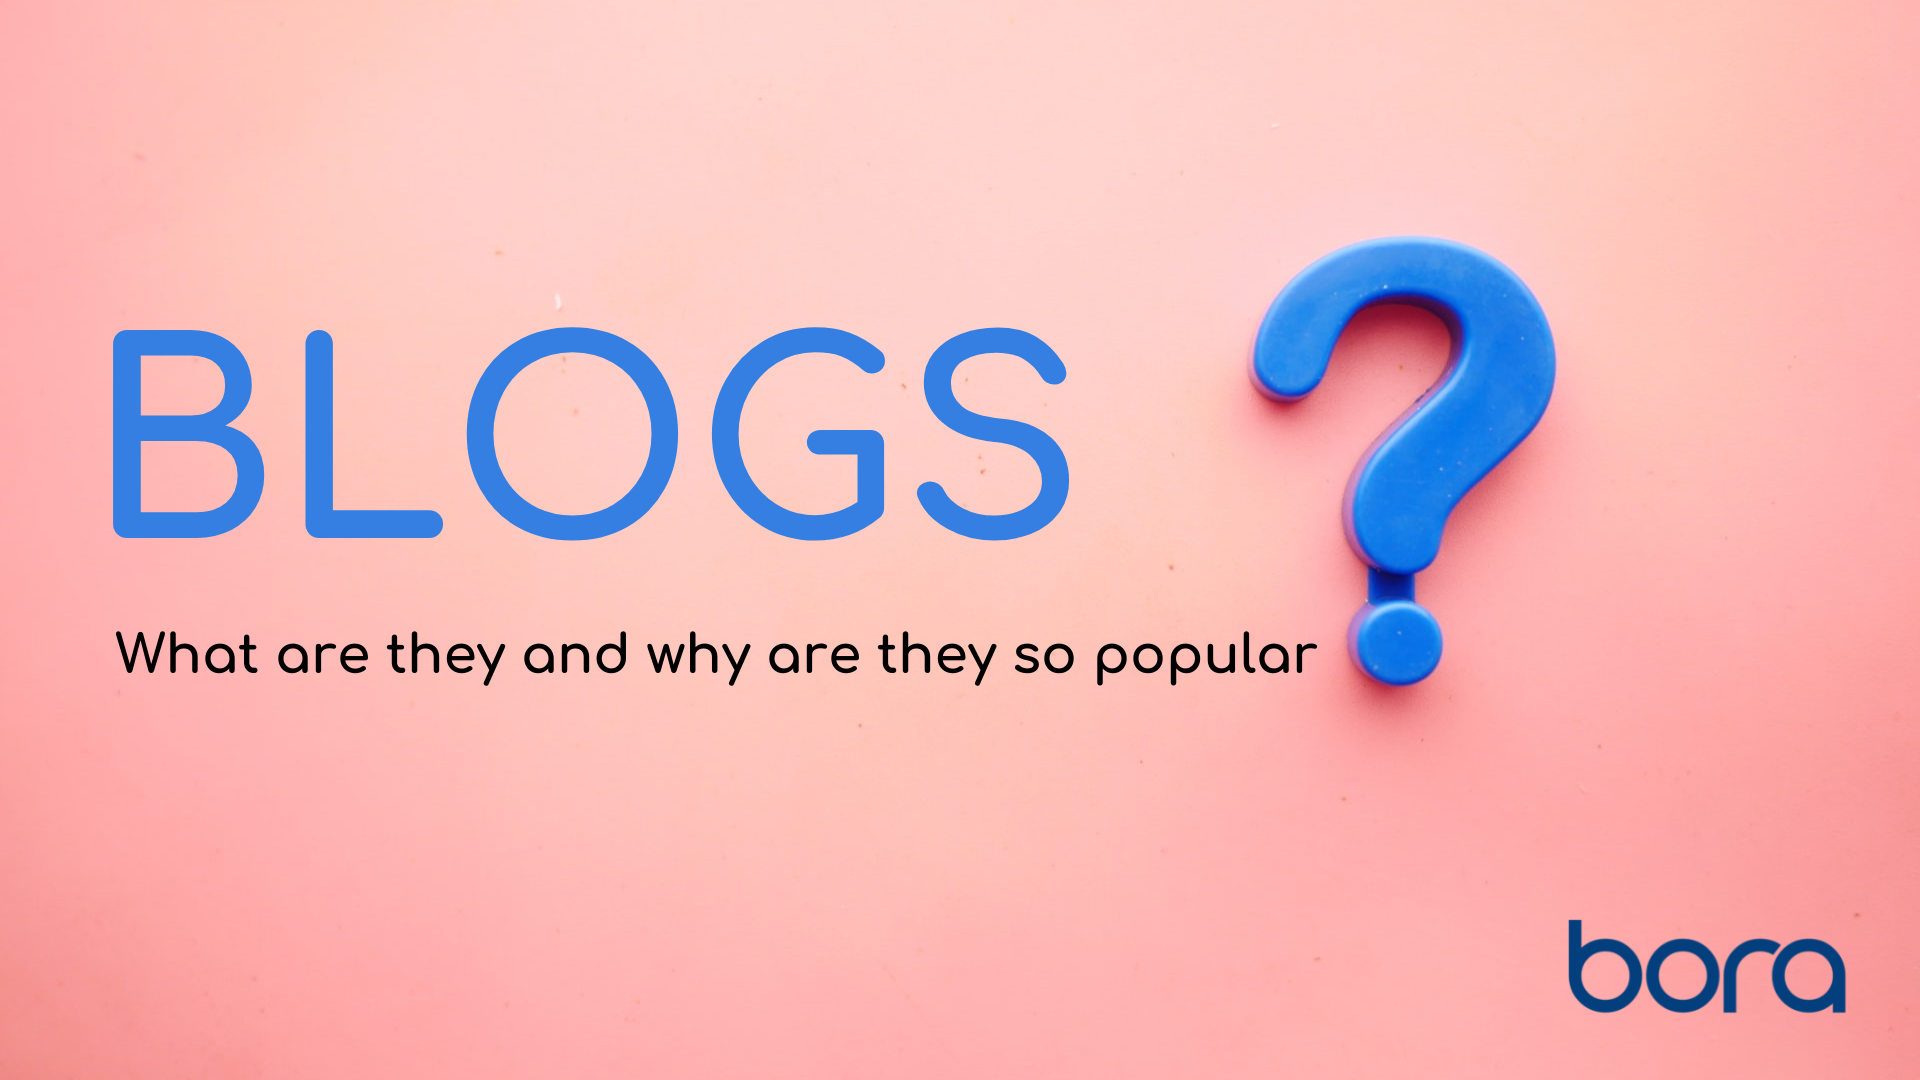 Blogs; what are they and why are they so popular?